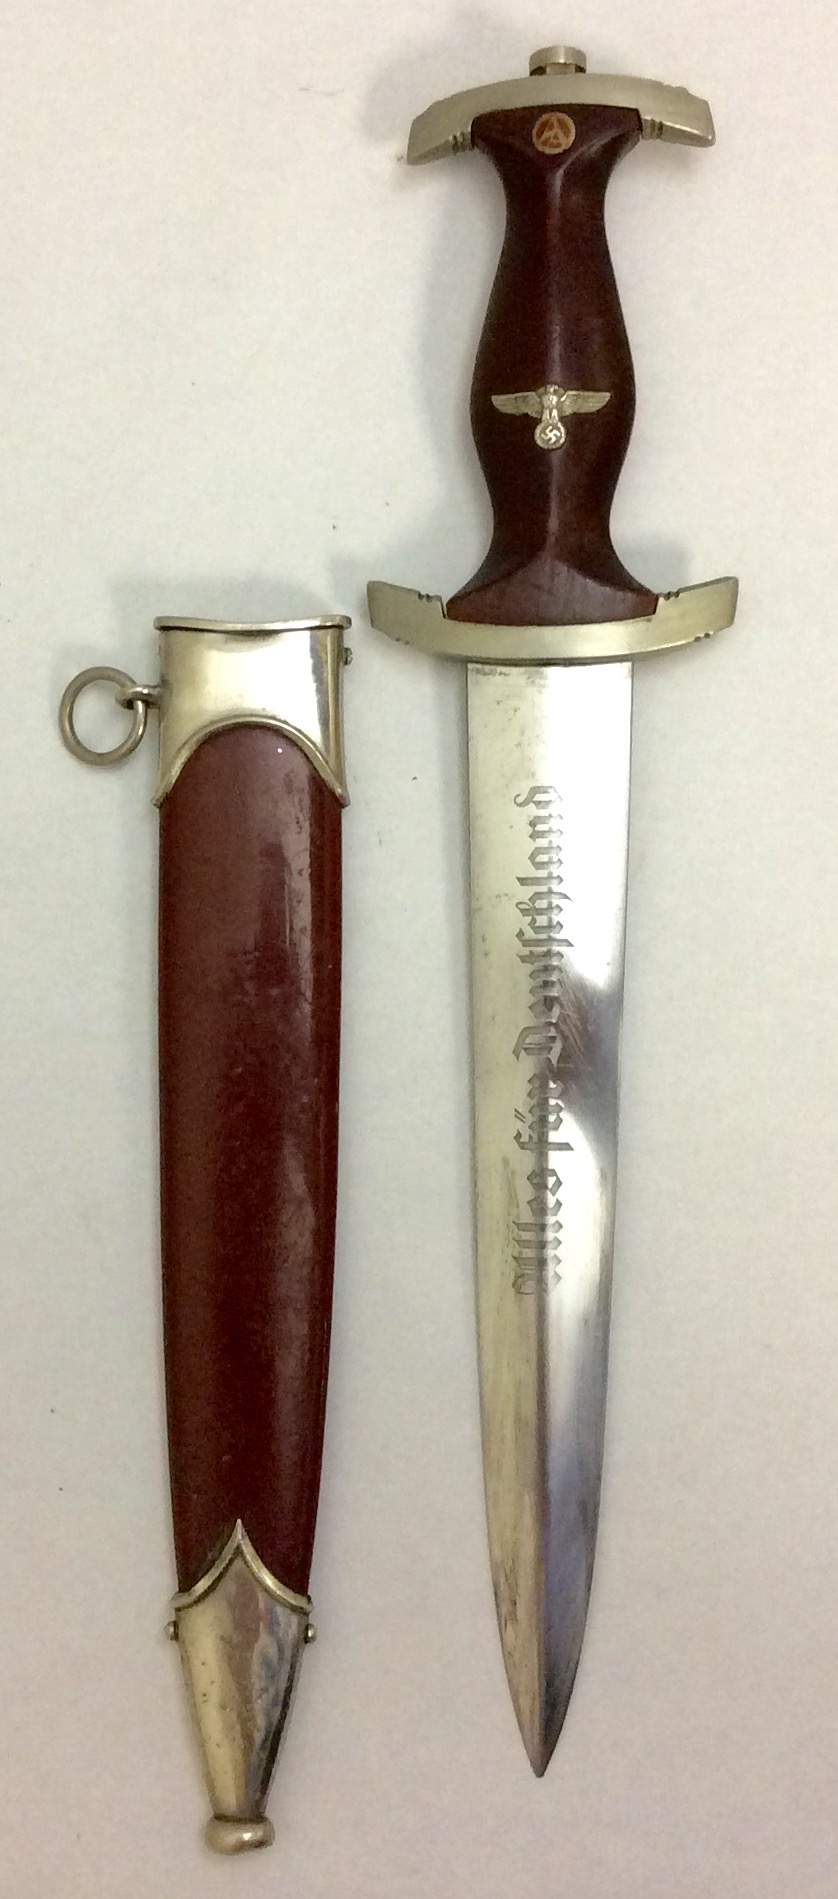 AN EARLY 20TH CENTURY GERMAN SA DAGGER Having a brown handle with nickel plated fittings and